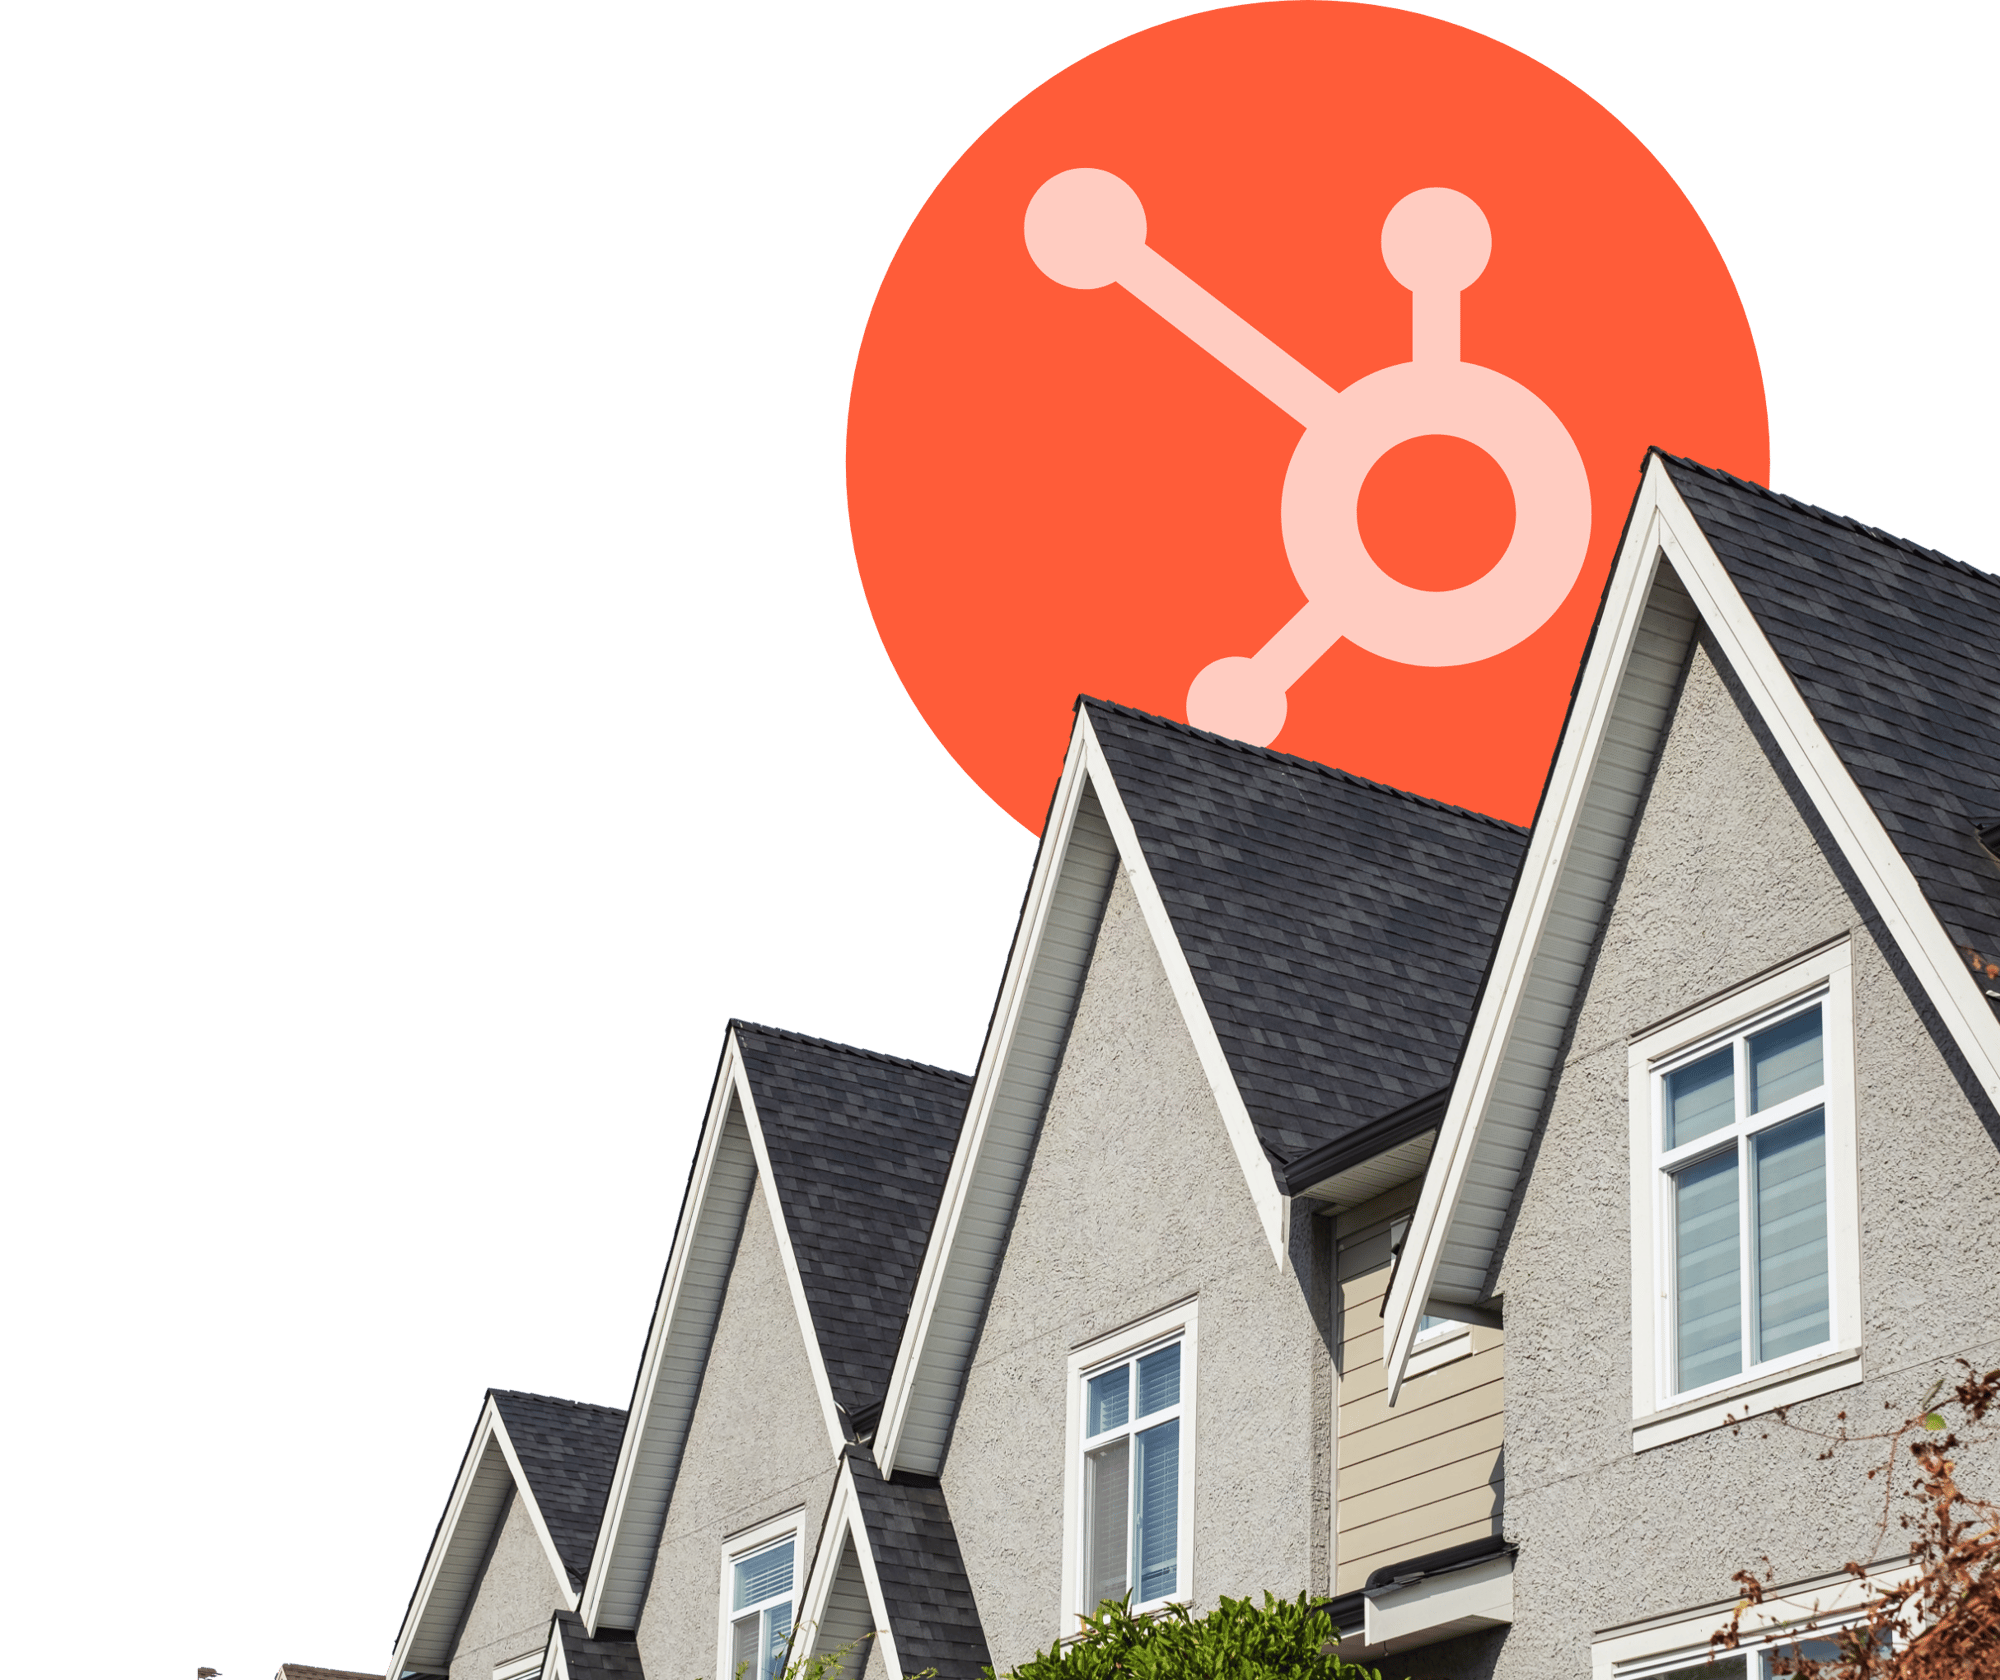 Roof-house-with-hubspot-logo-for-real-estate